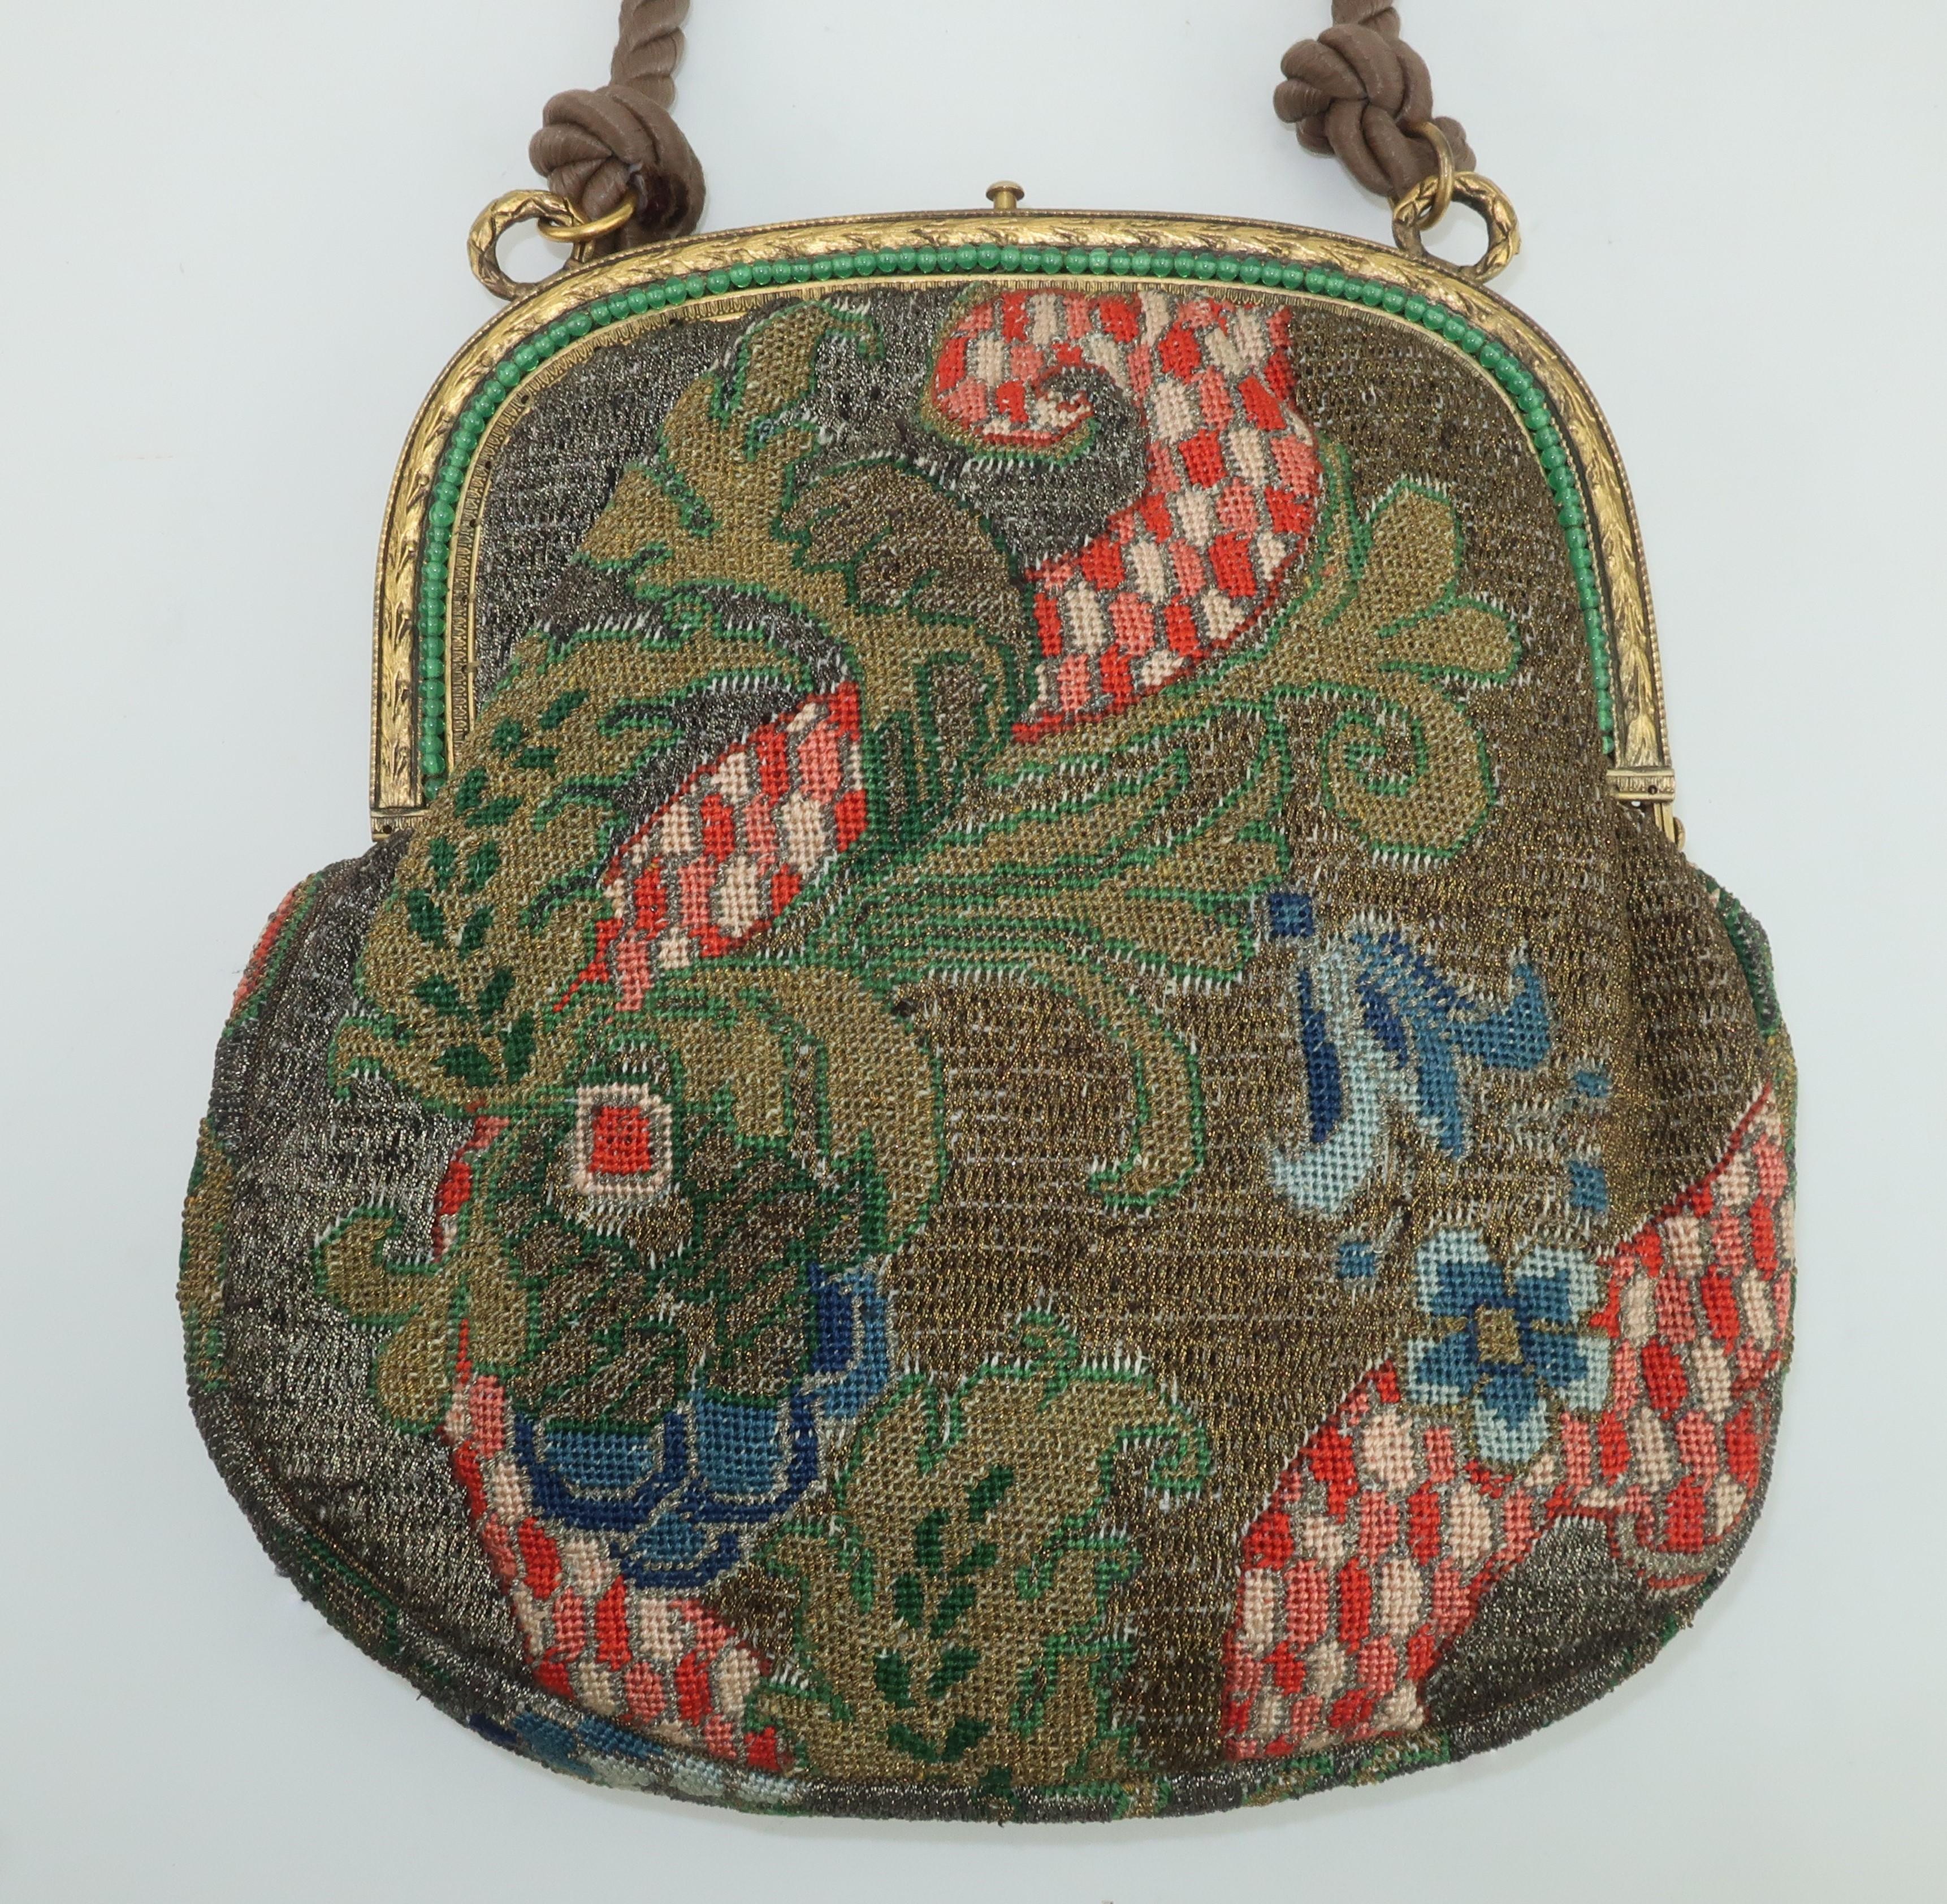 Early 20th Century French petit point handbag with an abstract Art Deco floral pattern in shades of pink, red, green, blue and brown uniquely embellished by bronze metallic threading.  The gilt metal frame has a laurel leaf design with emerald green